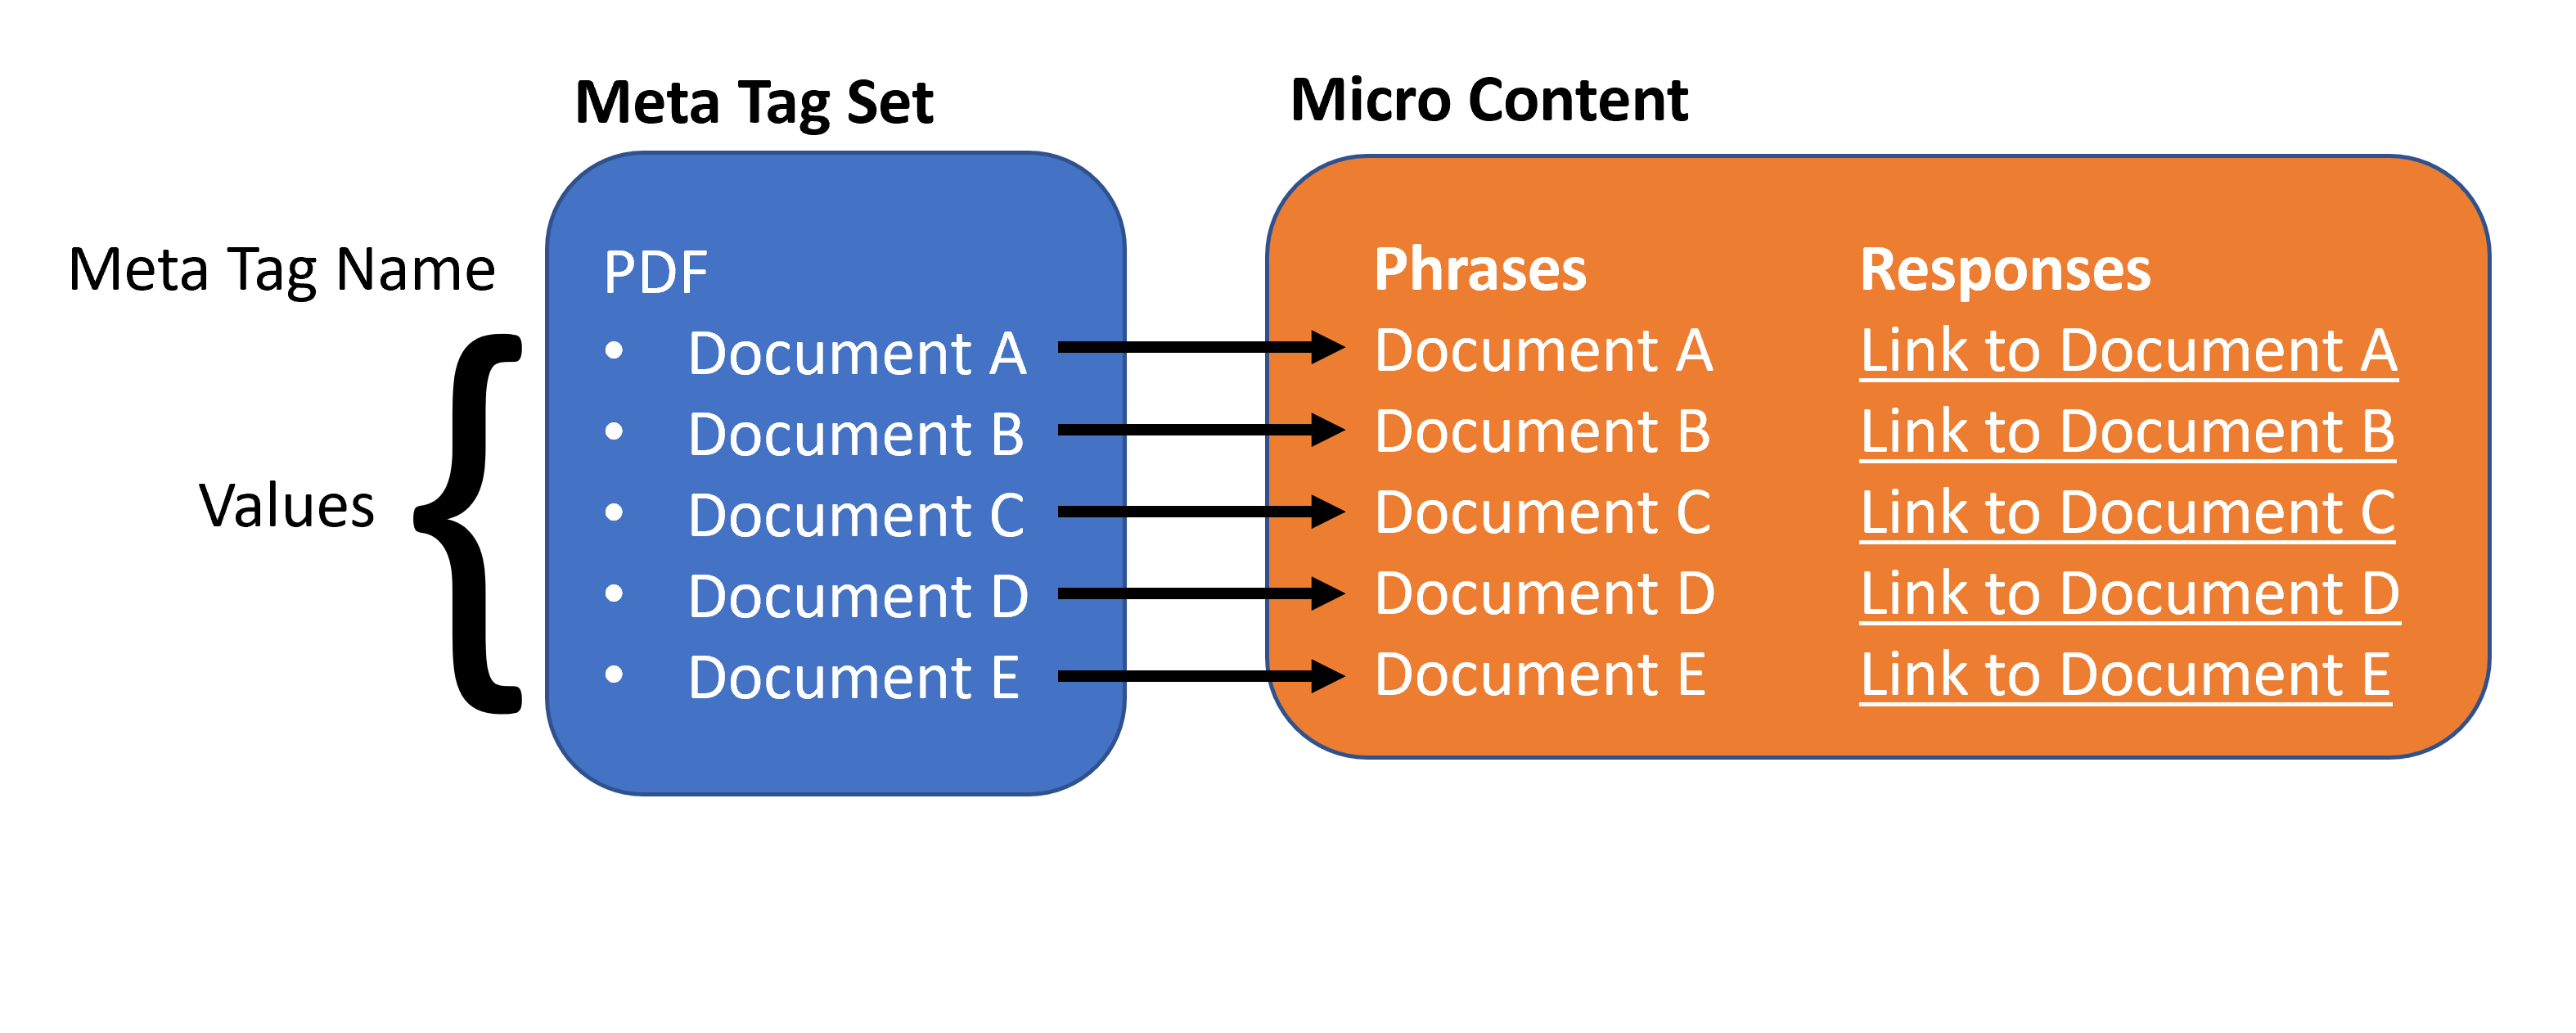 Diagram showing how Meta Tag values are mapped to Micro Content phrases